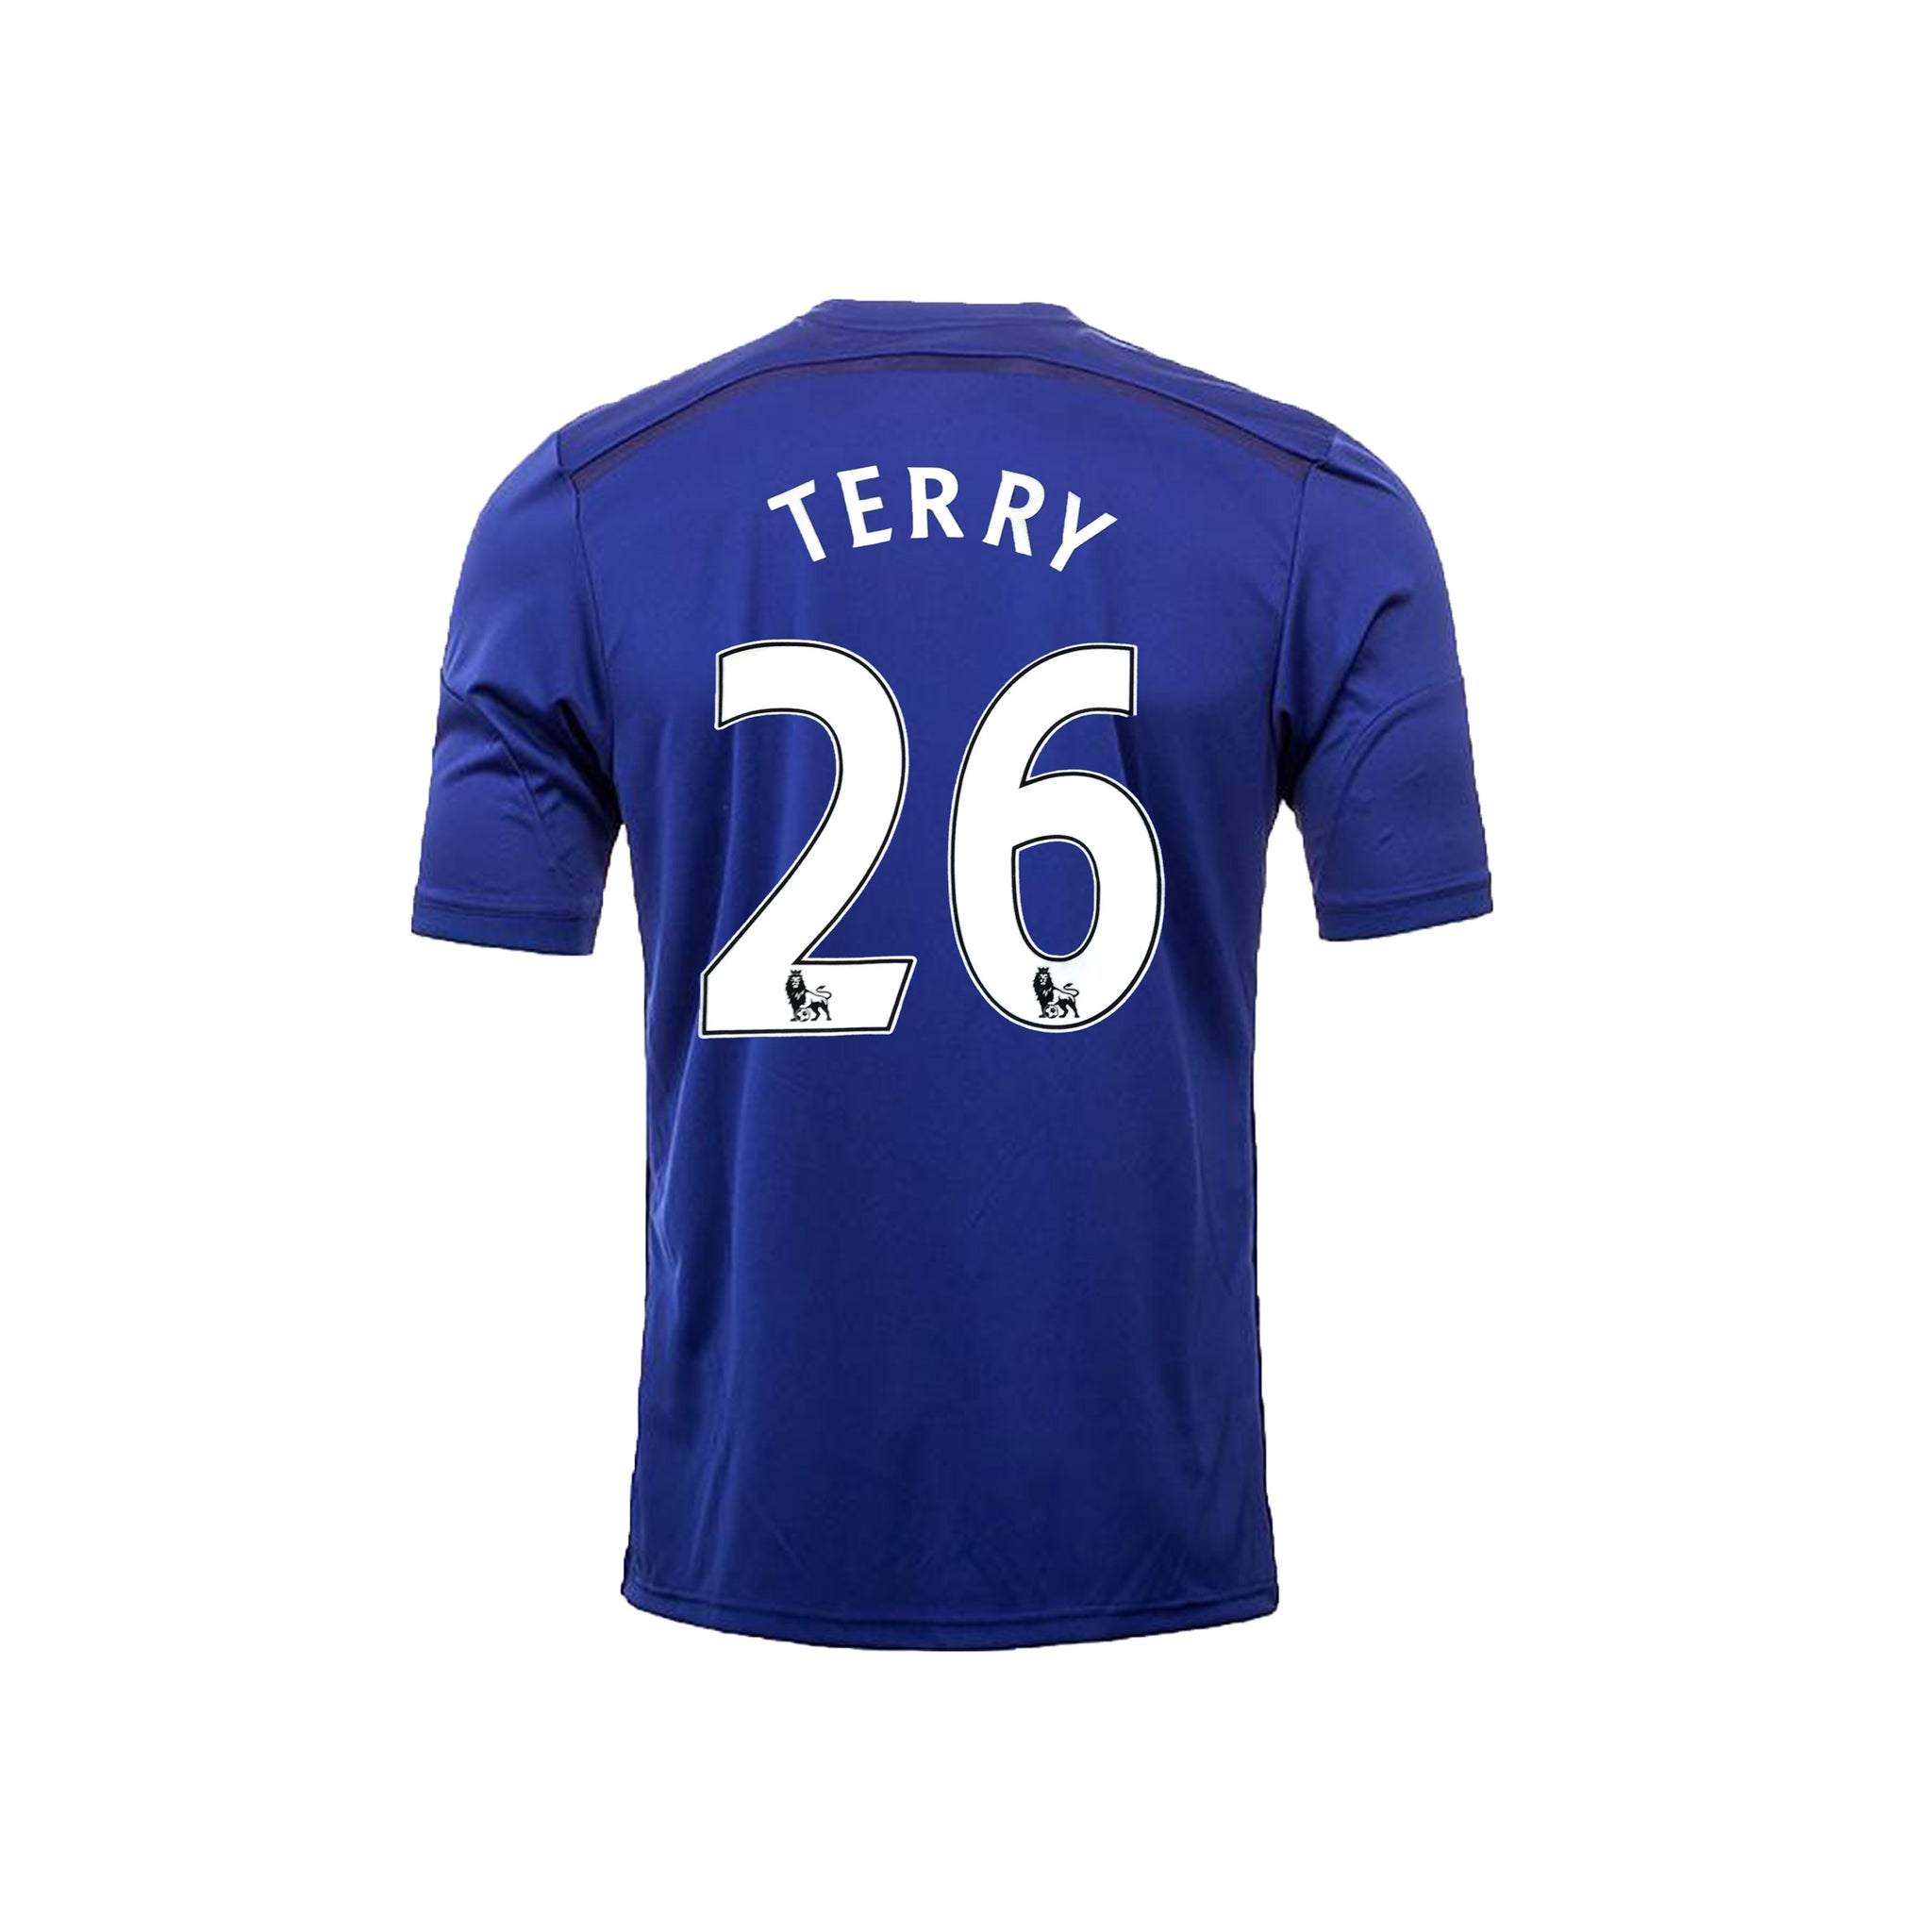 ADIDAS Chelsea FC Home TERRY 14/15